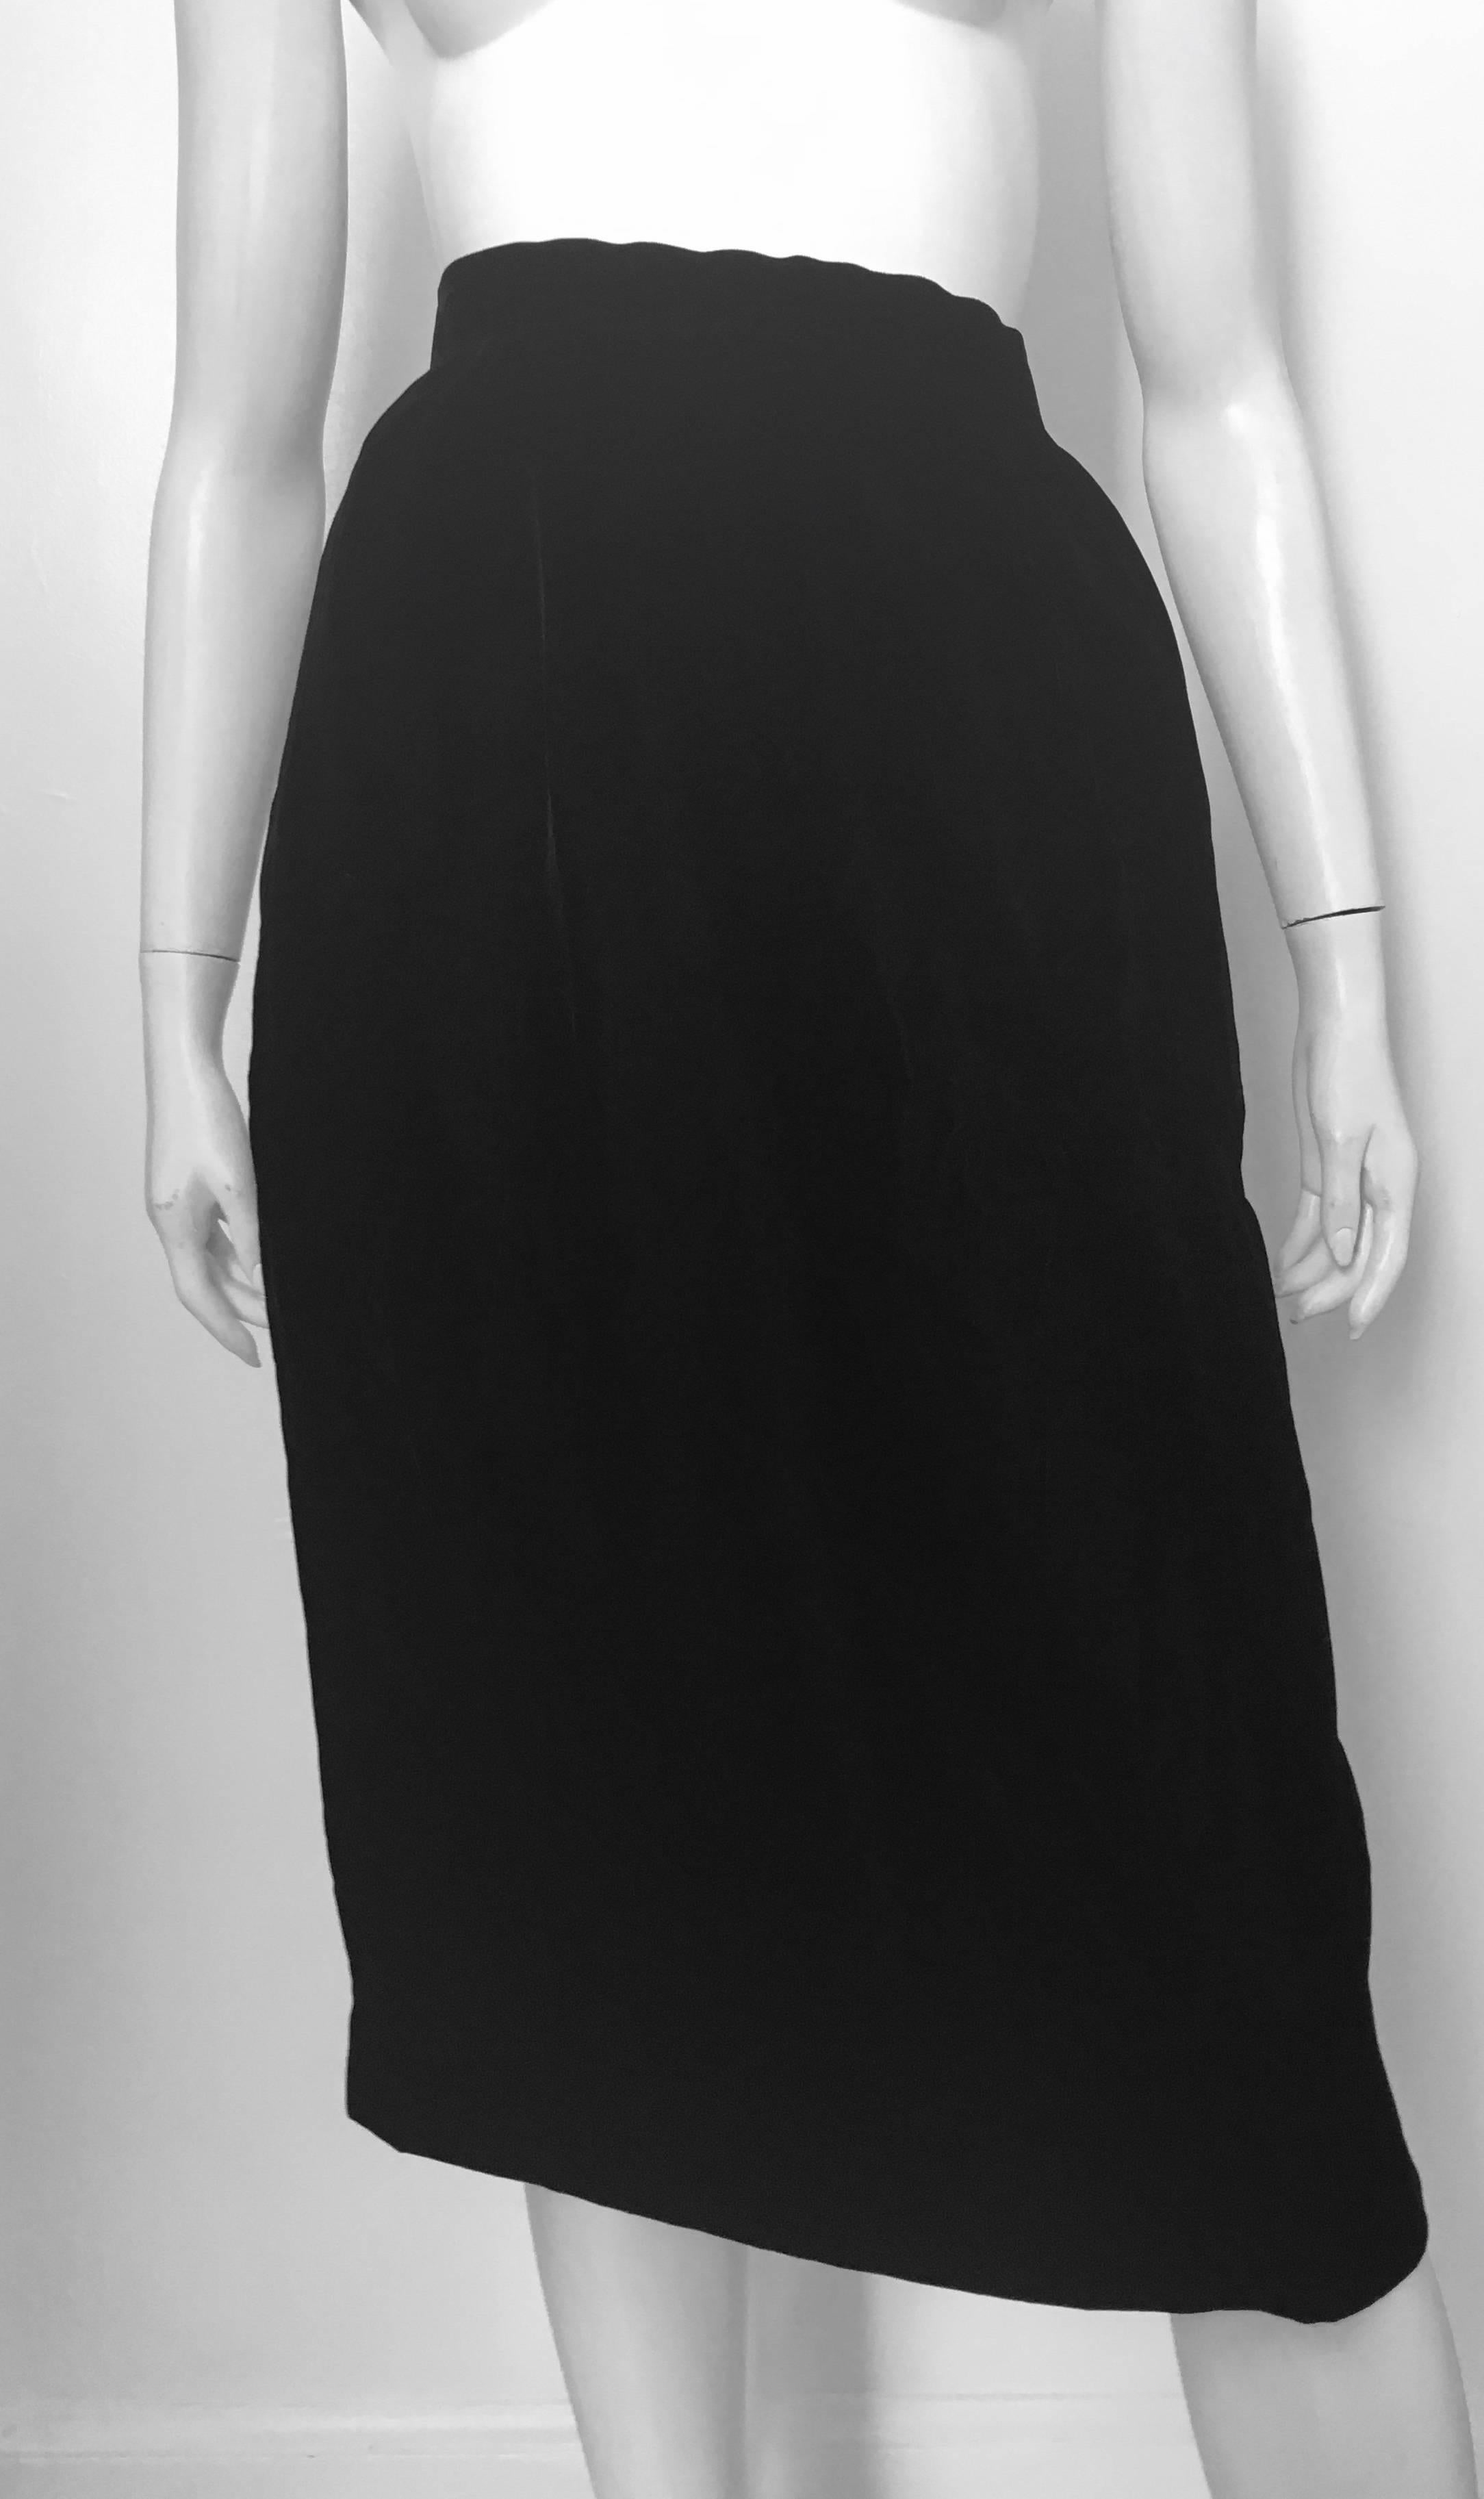 Oscar de la Renta Miss O 1980s black velvet long skirt is labeled a size 12 but fits like a modern USA size 6.  Ladies please grab your tape measure so you can properly measure your waist, hips and length to make certain this will fit your lovely